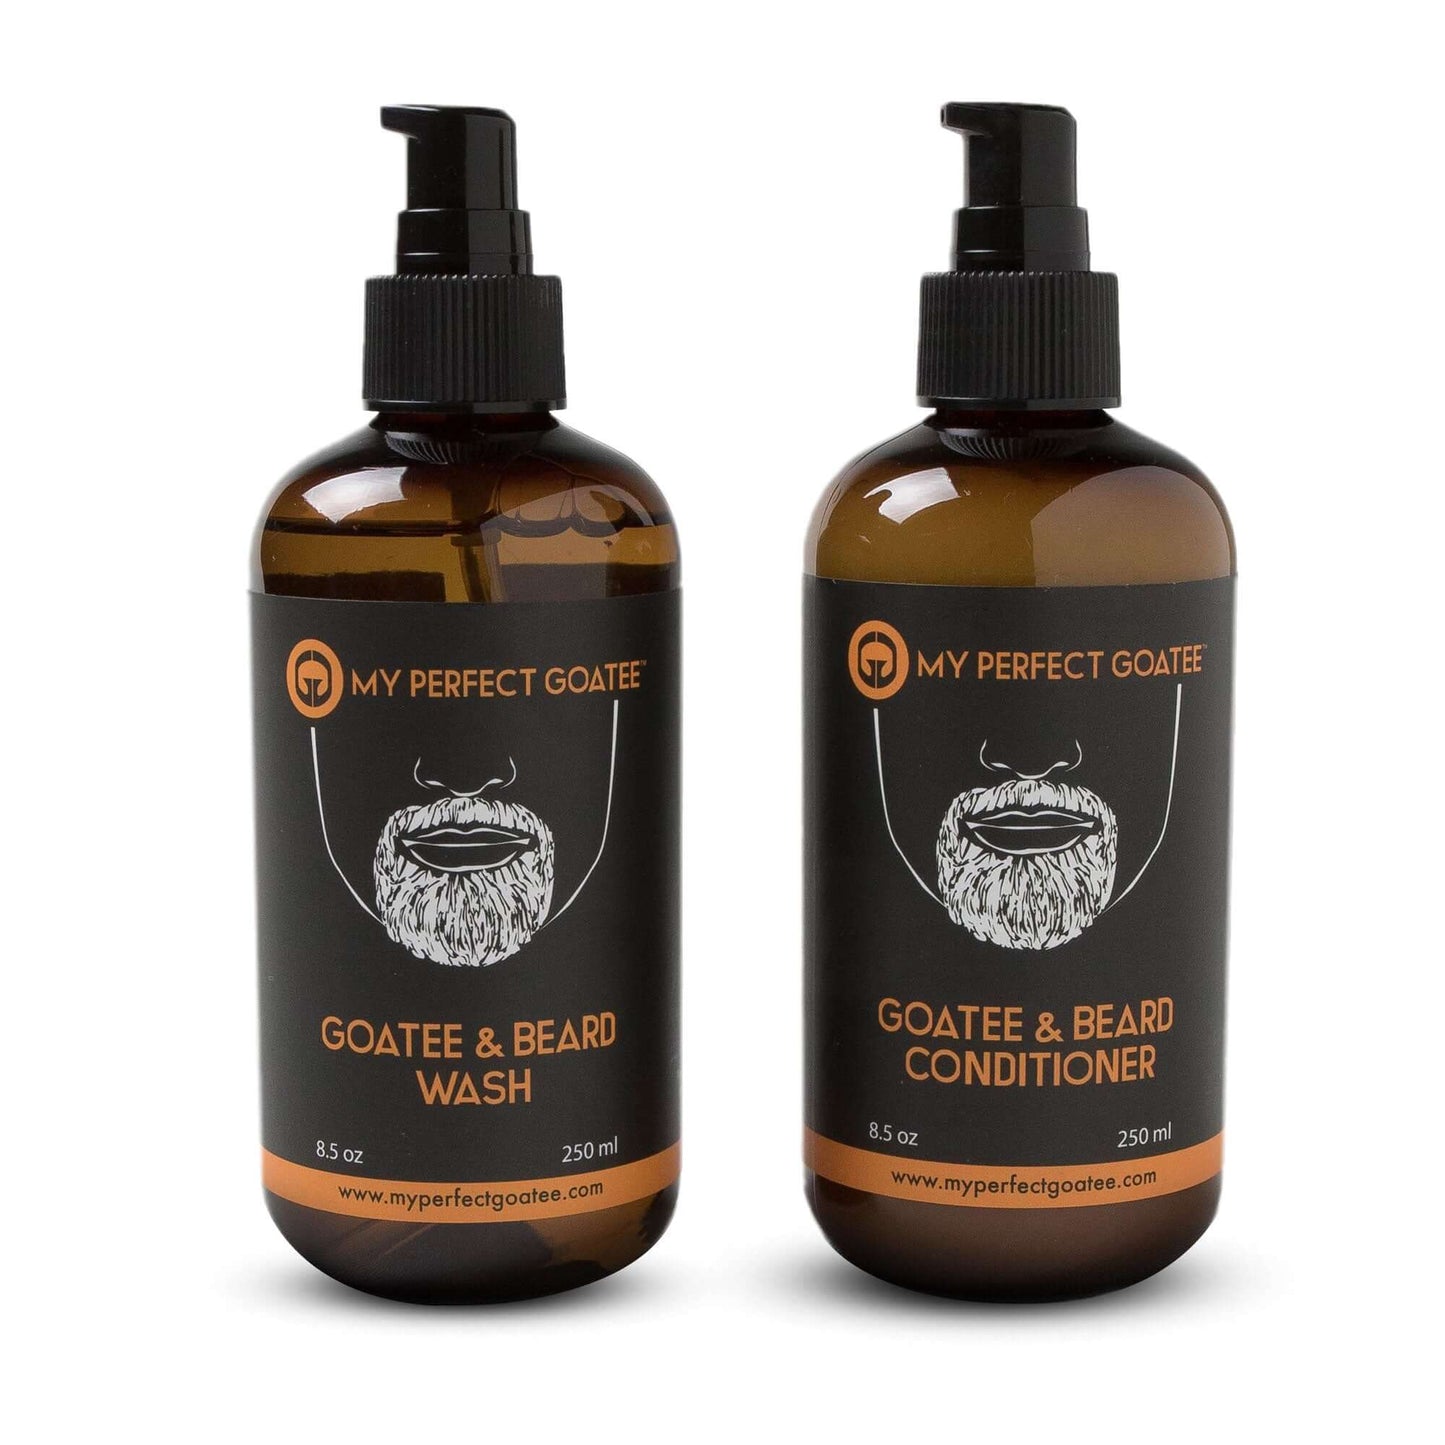 Image of My Perfect Goatee® Beard Wash and Beard Conditioner